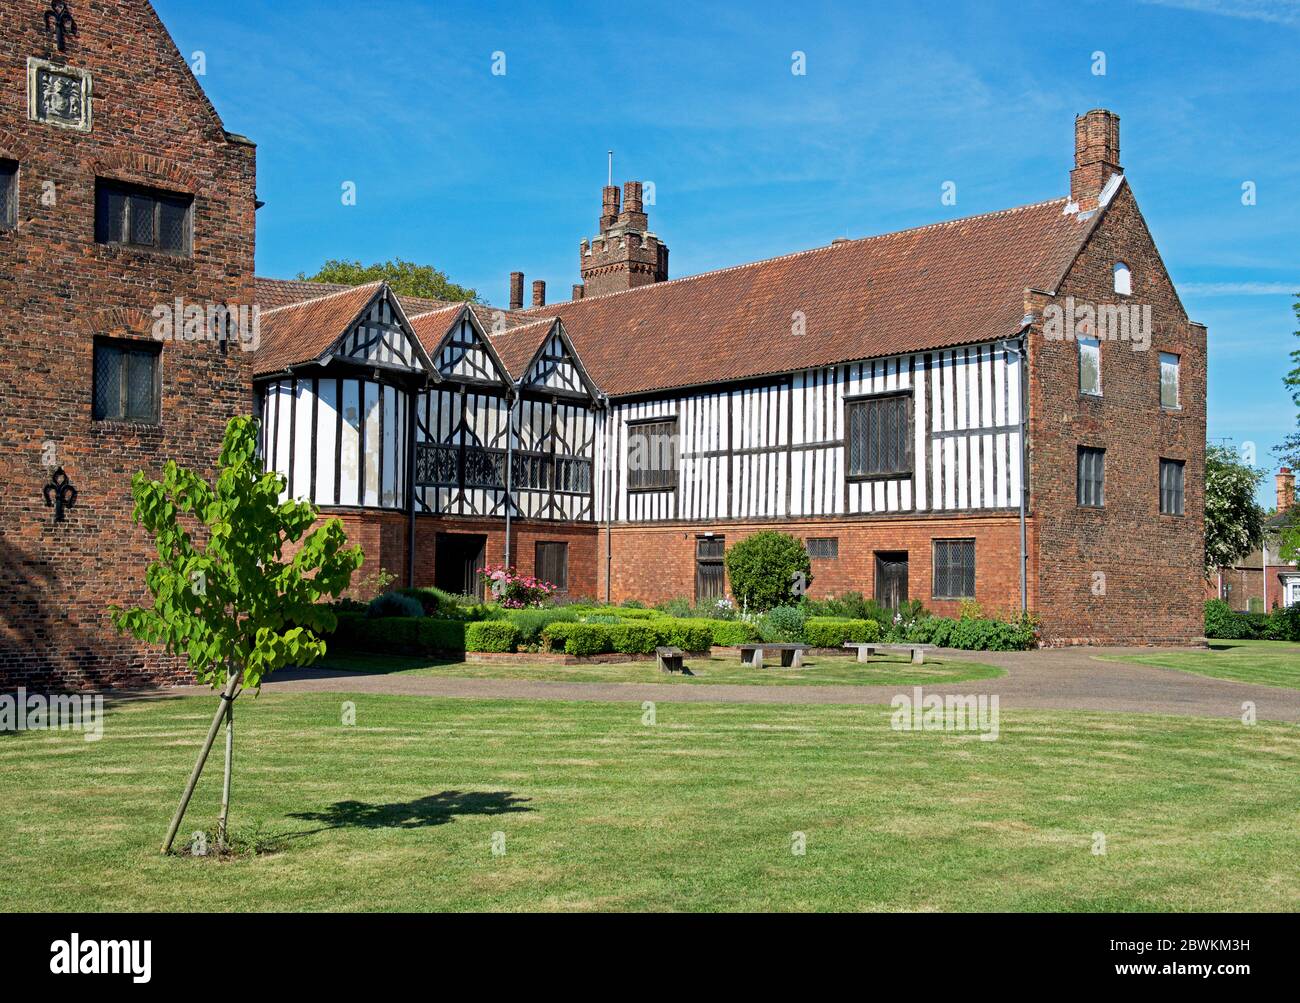 Gainsborough Old Hall A Medieval Manor House In Gainsborough Lincolnshire England Uk Stock Photo Alamy